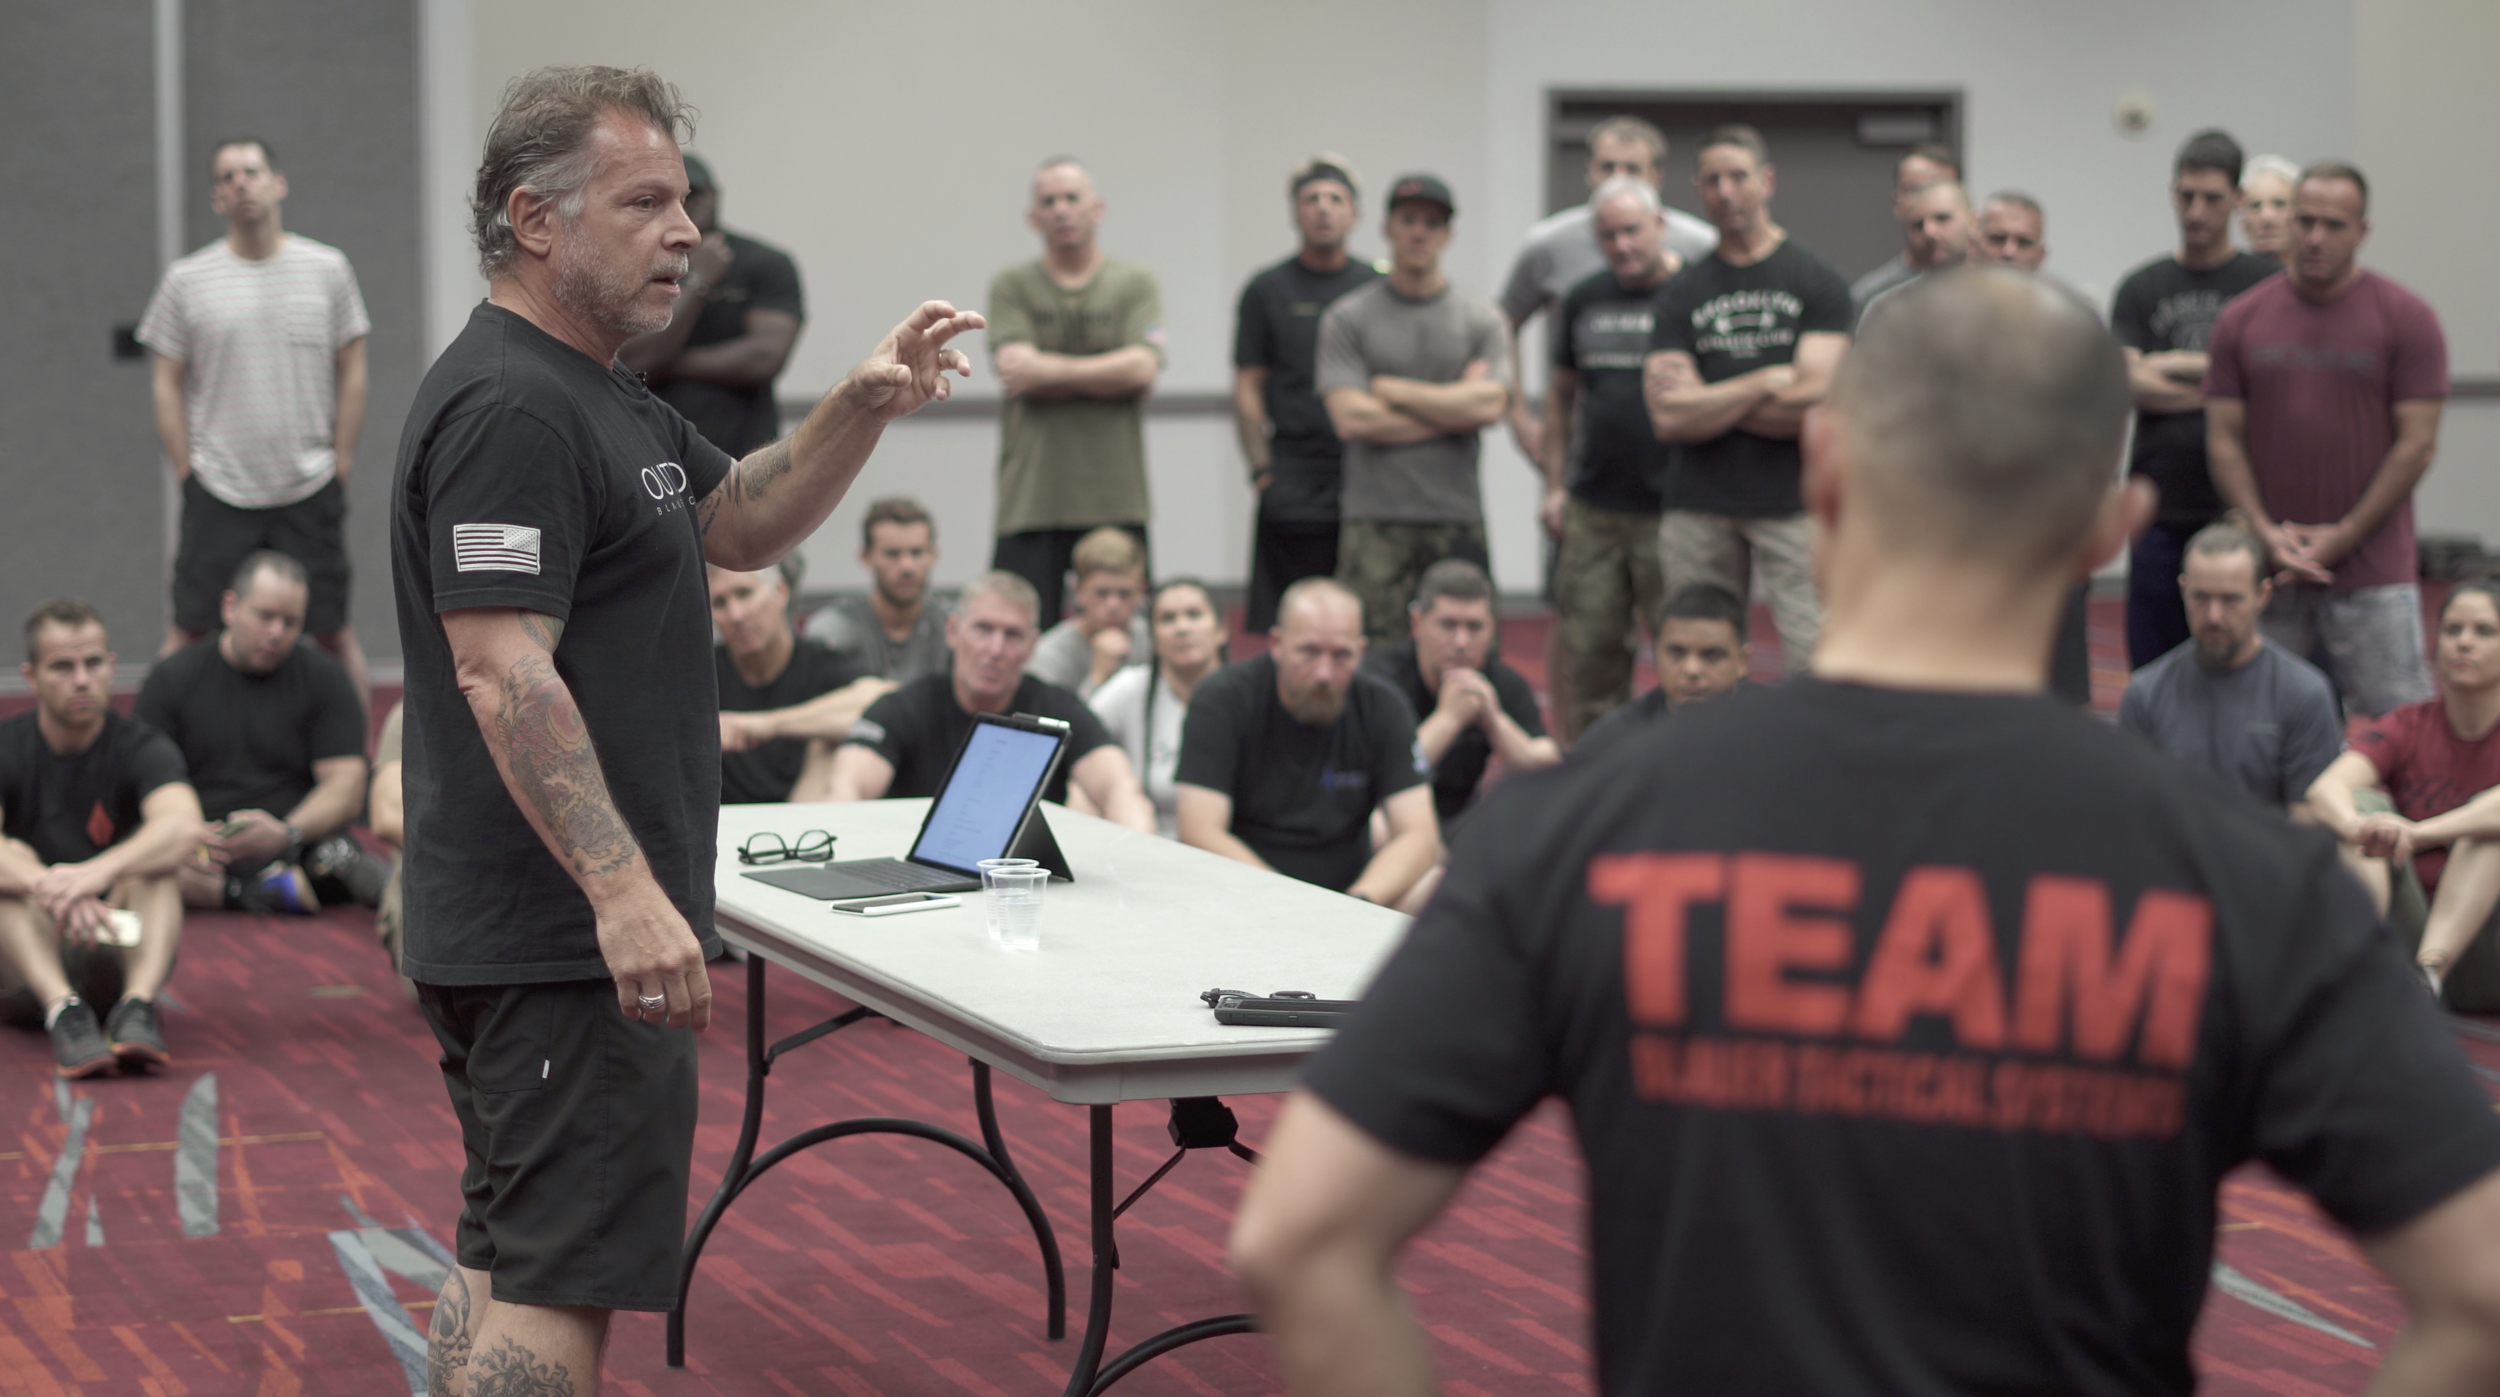 Coach Blauer teaches military, police, and first responders how to Know Fear.